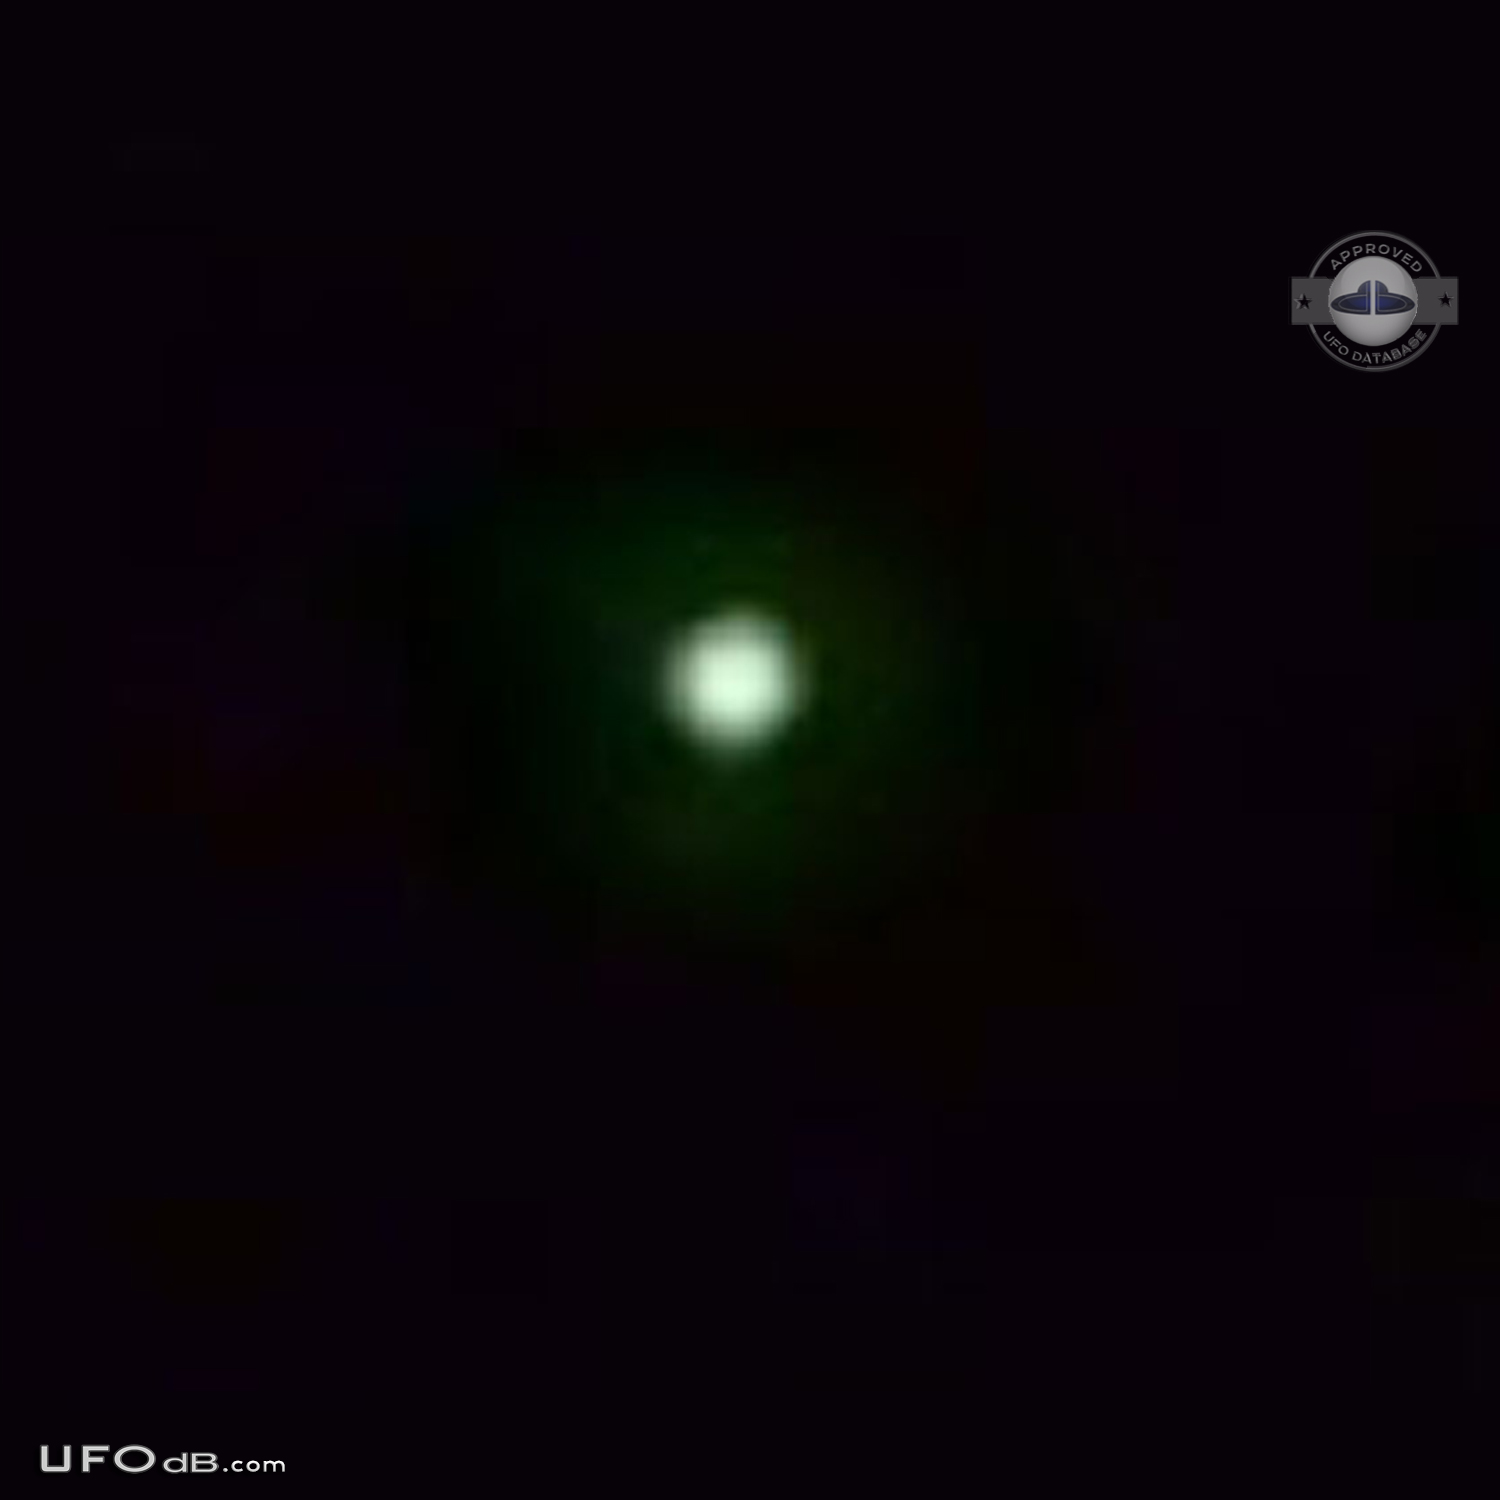 Fleet of 5 bright lights UFOs seen by many witnesses in Johannesburg UFO Picture #487-5